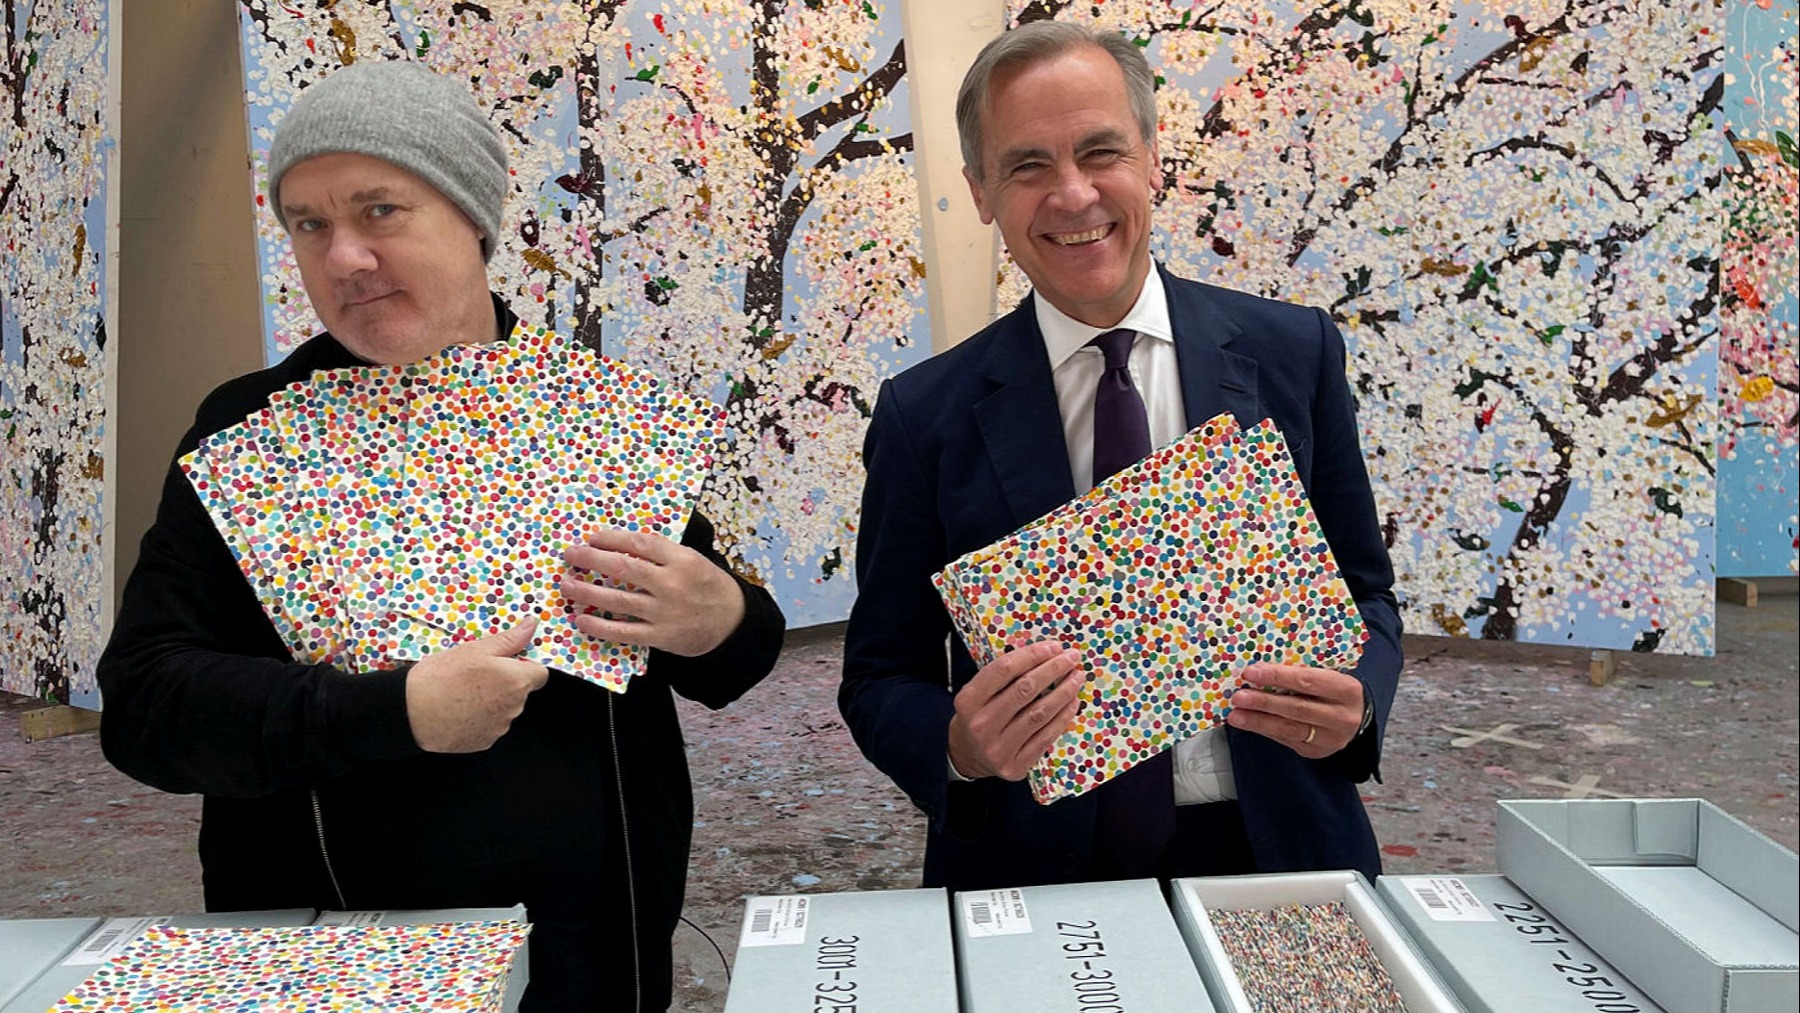 Damien Hirst launches his own NFT 'Currency' | Financial Times